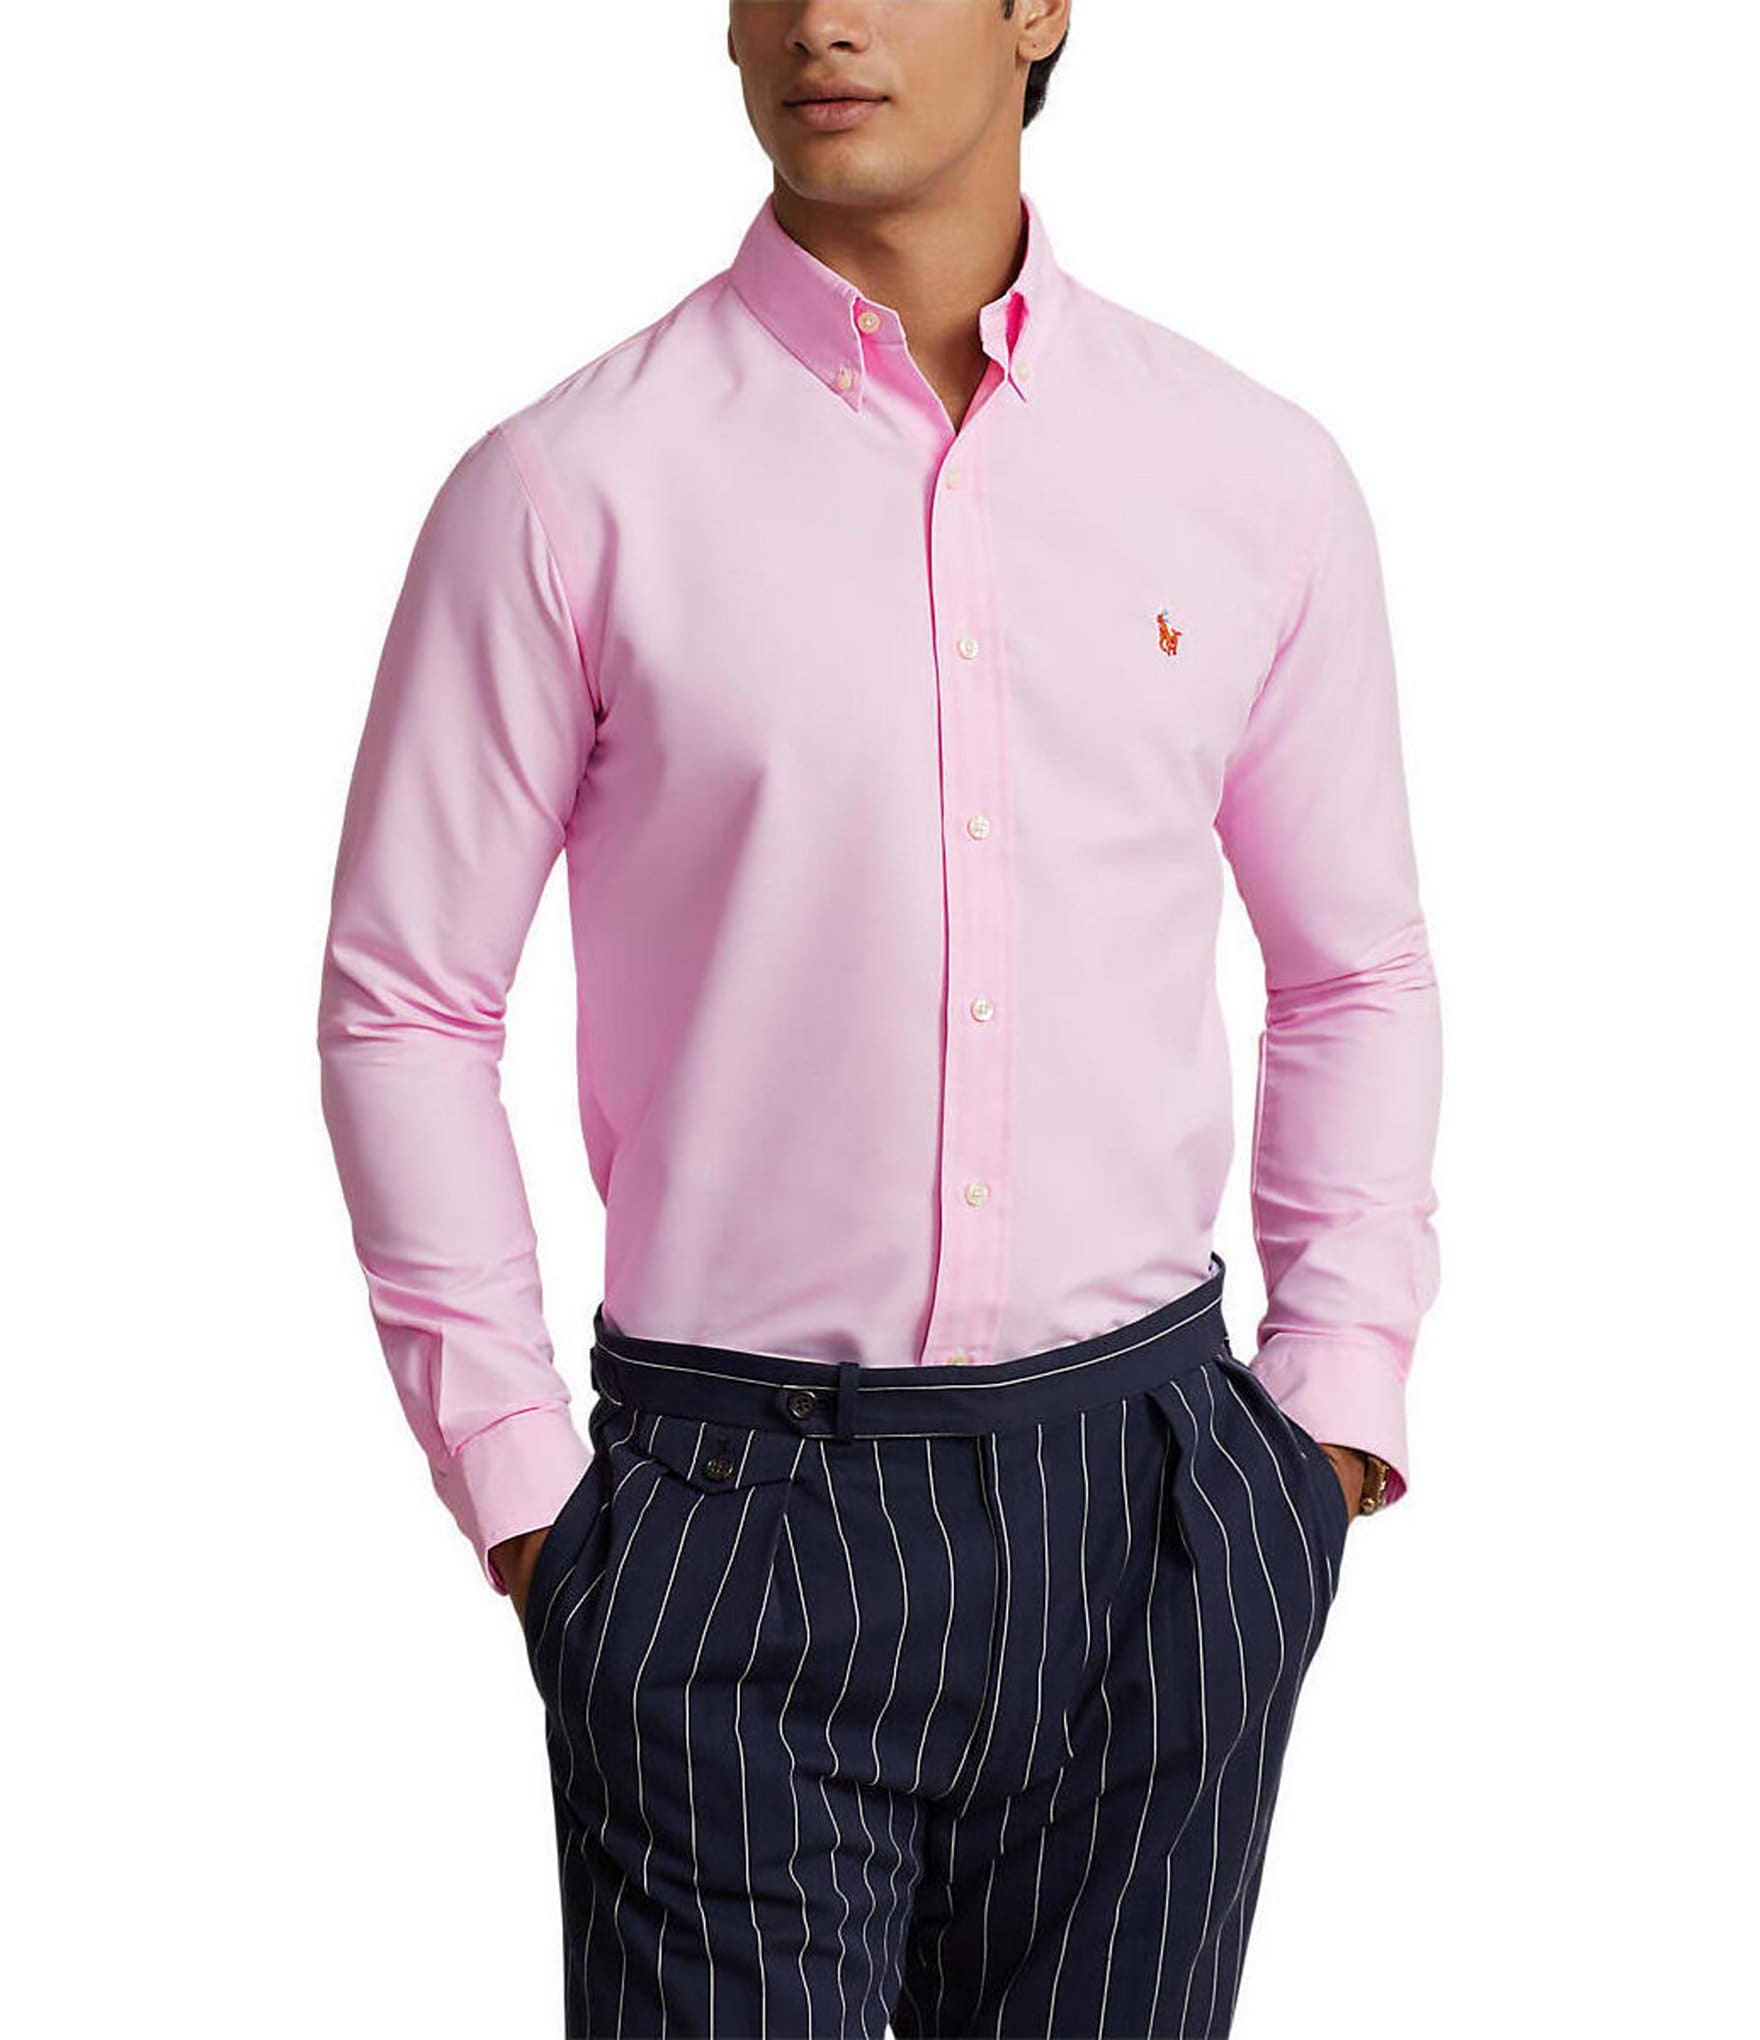 Polo Ralph Lauren Classic Fit Performance Stretch Oxford Long Sleeve ...